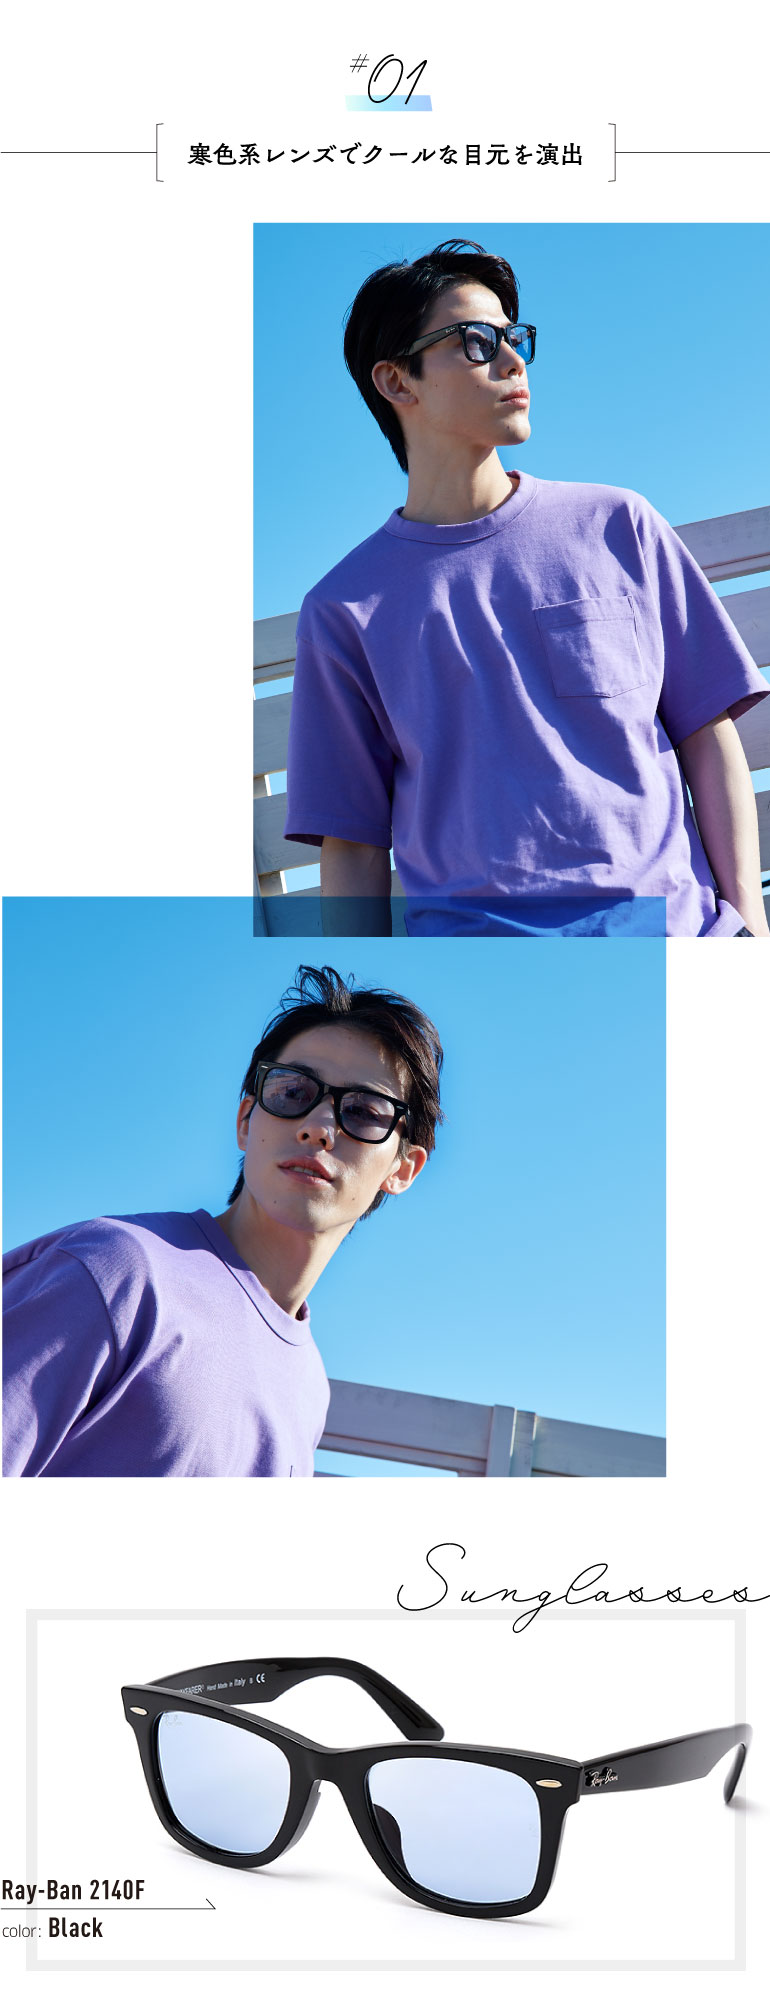 21 Summer Styling 01 サングラスでピリッと締める夏コーデ Mens編 Features News Optique Paris Miki Opt Label Opt Gout